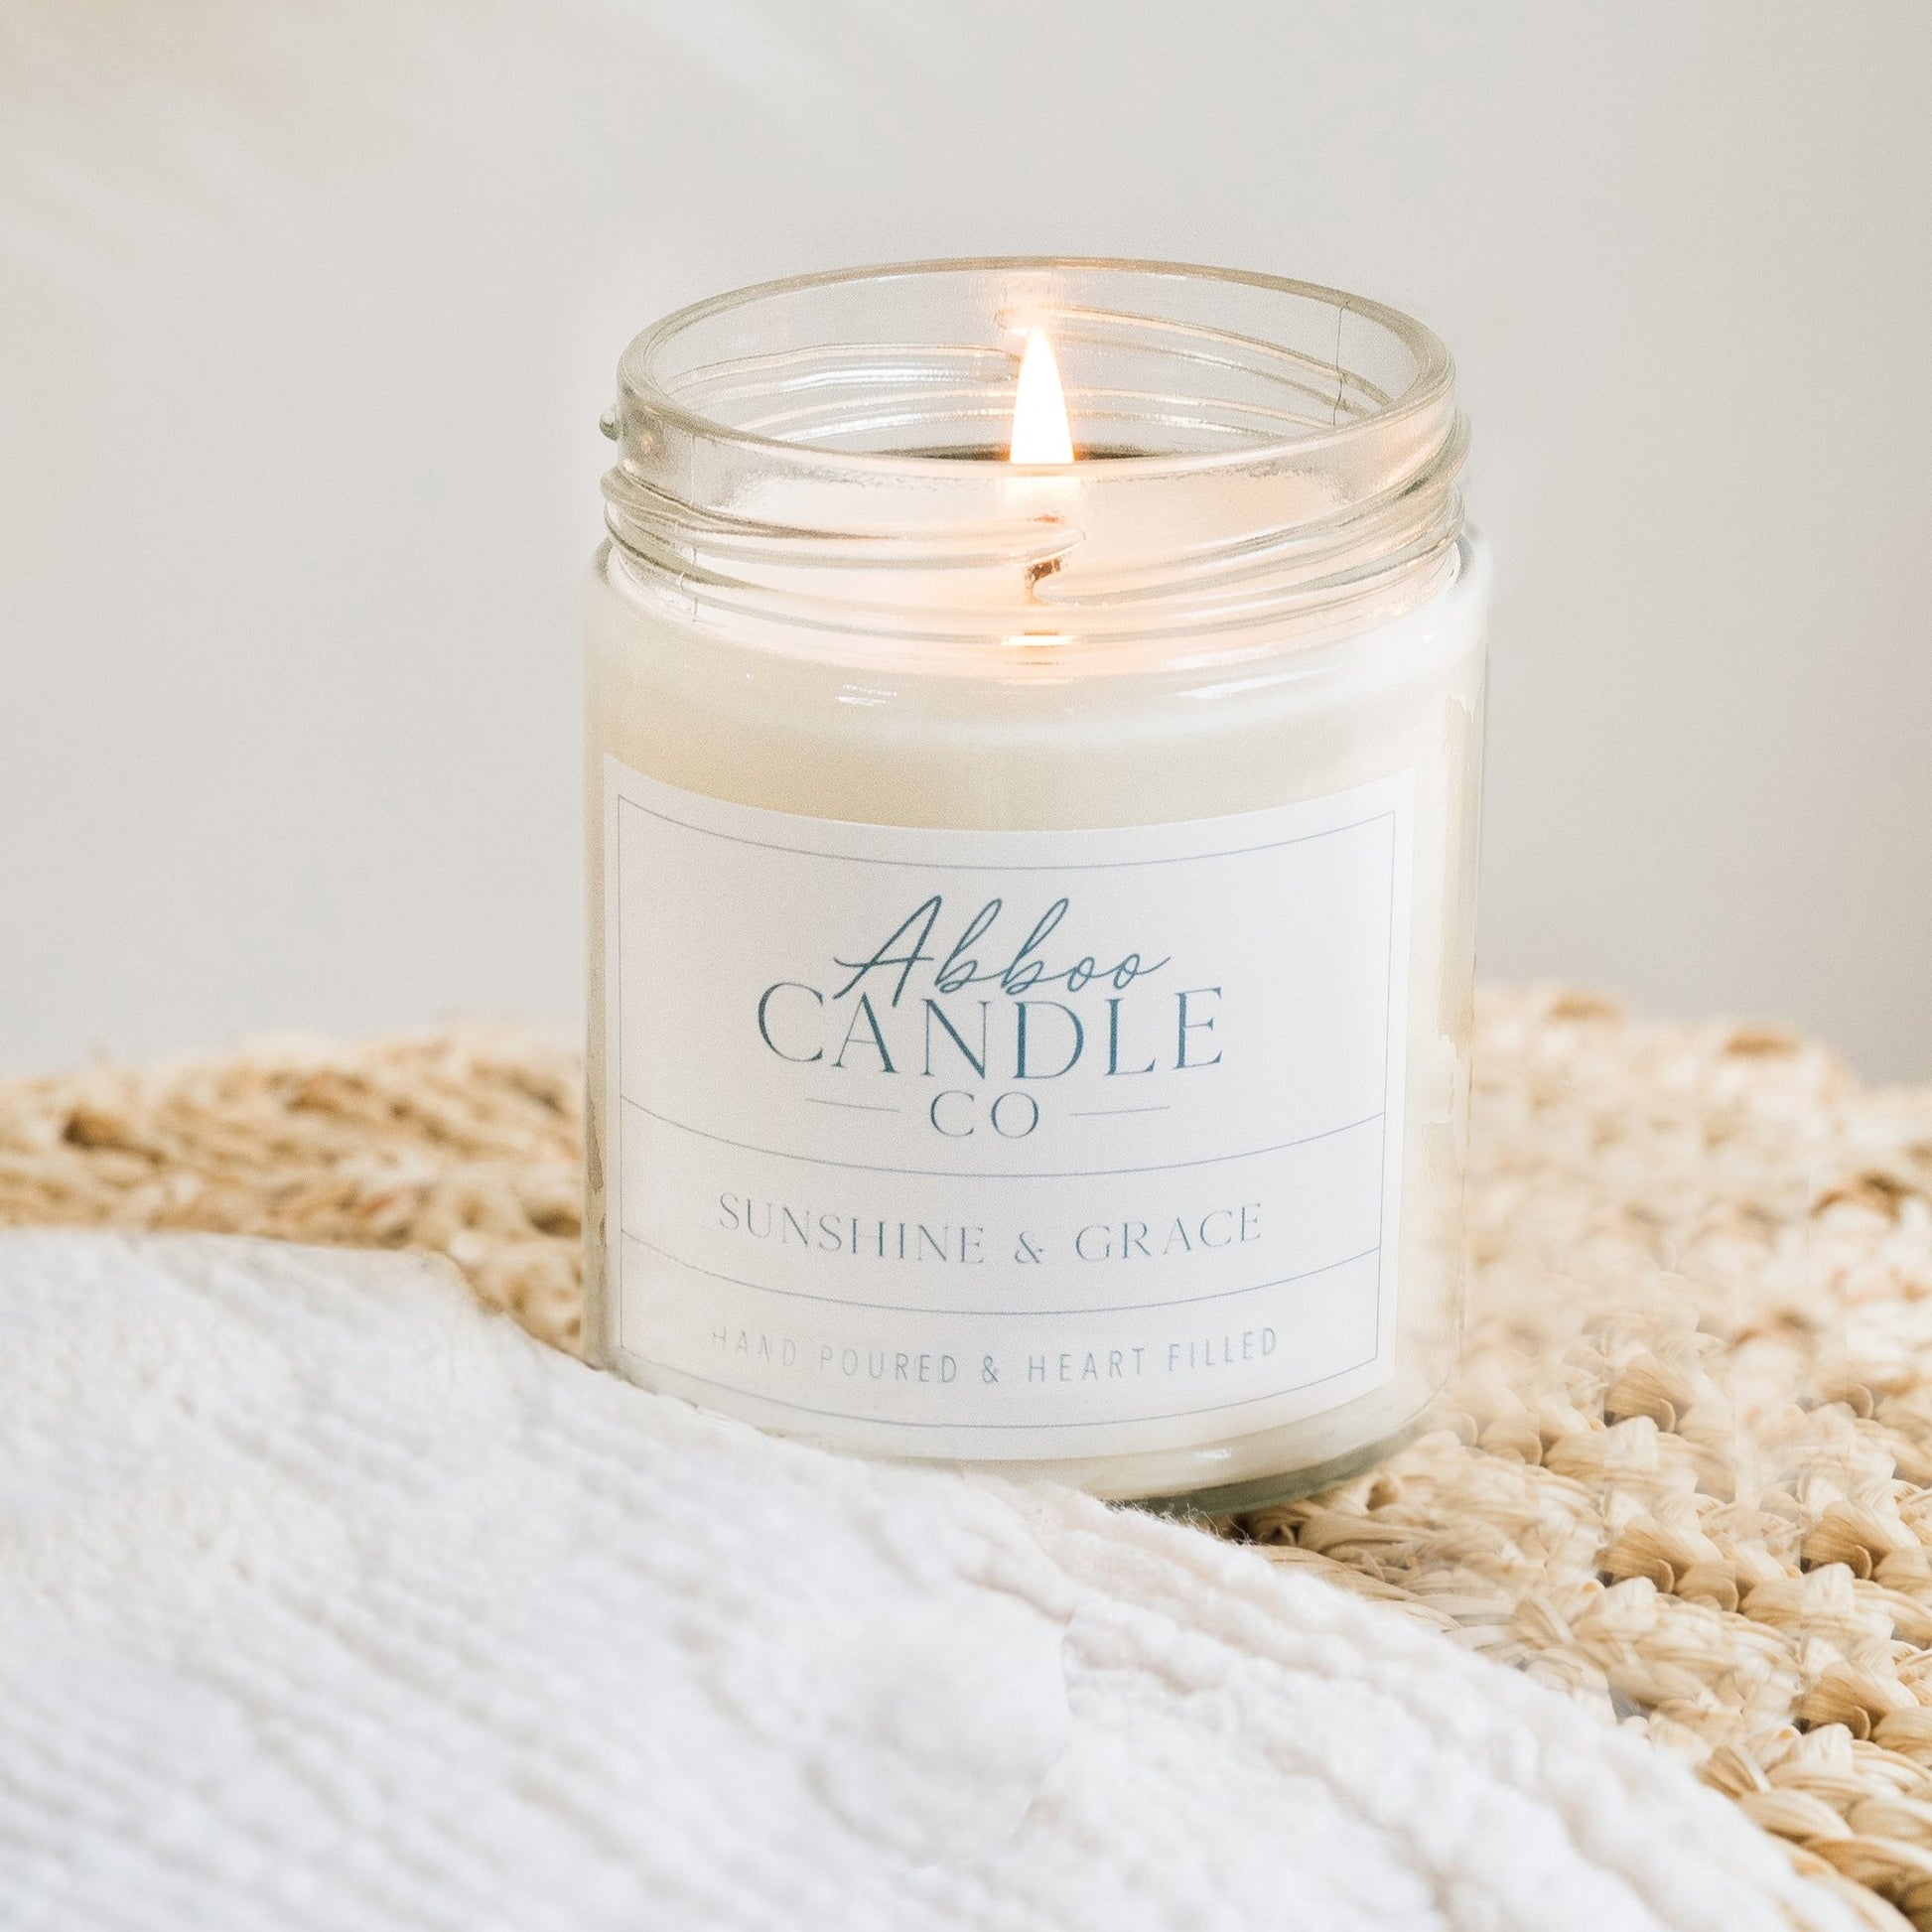 Sunshine and Grace Soy Candle - Abboo Candle Co